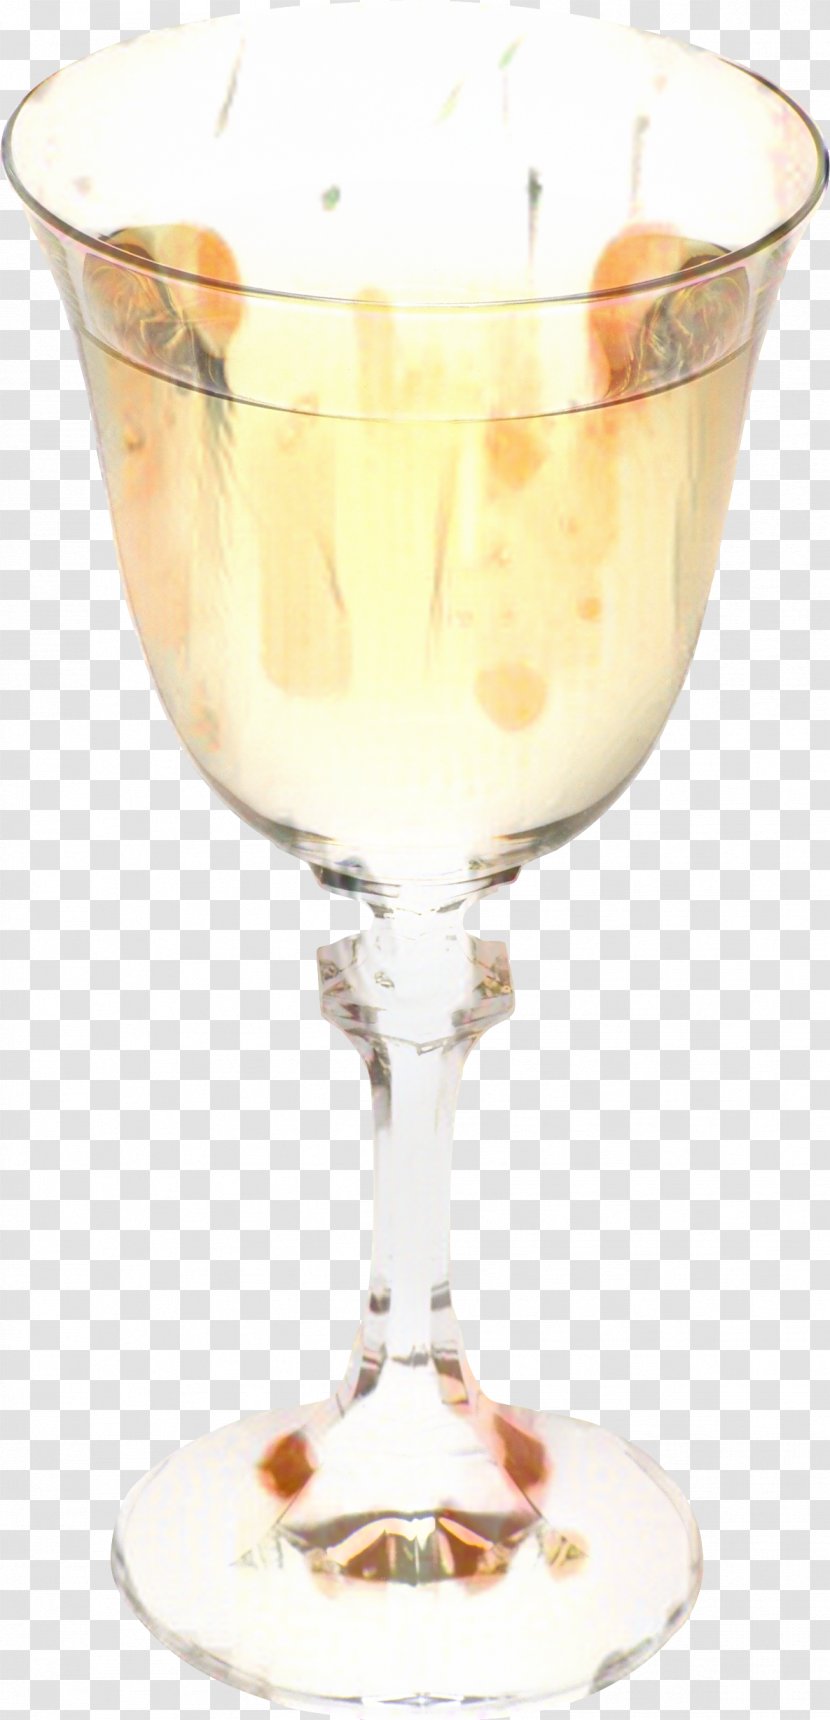 Wine Background - Classic Cocktail - Martini Glass Nonalcoholic Beverage Transparent PNG